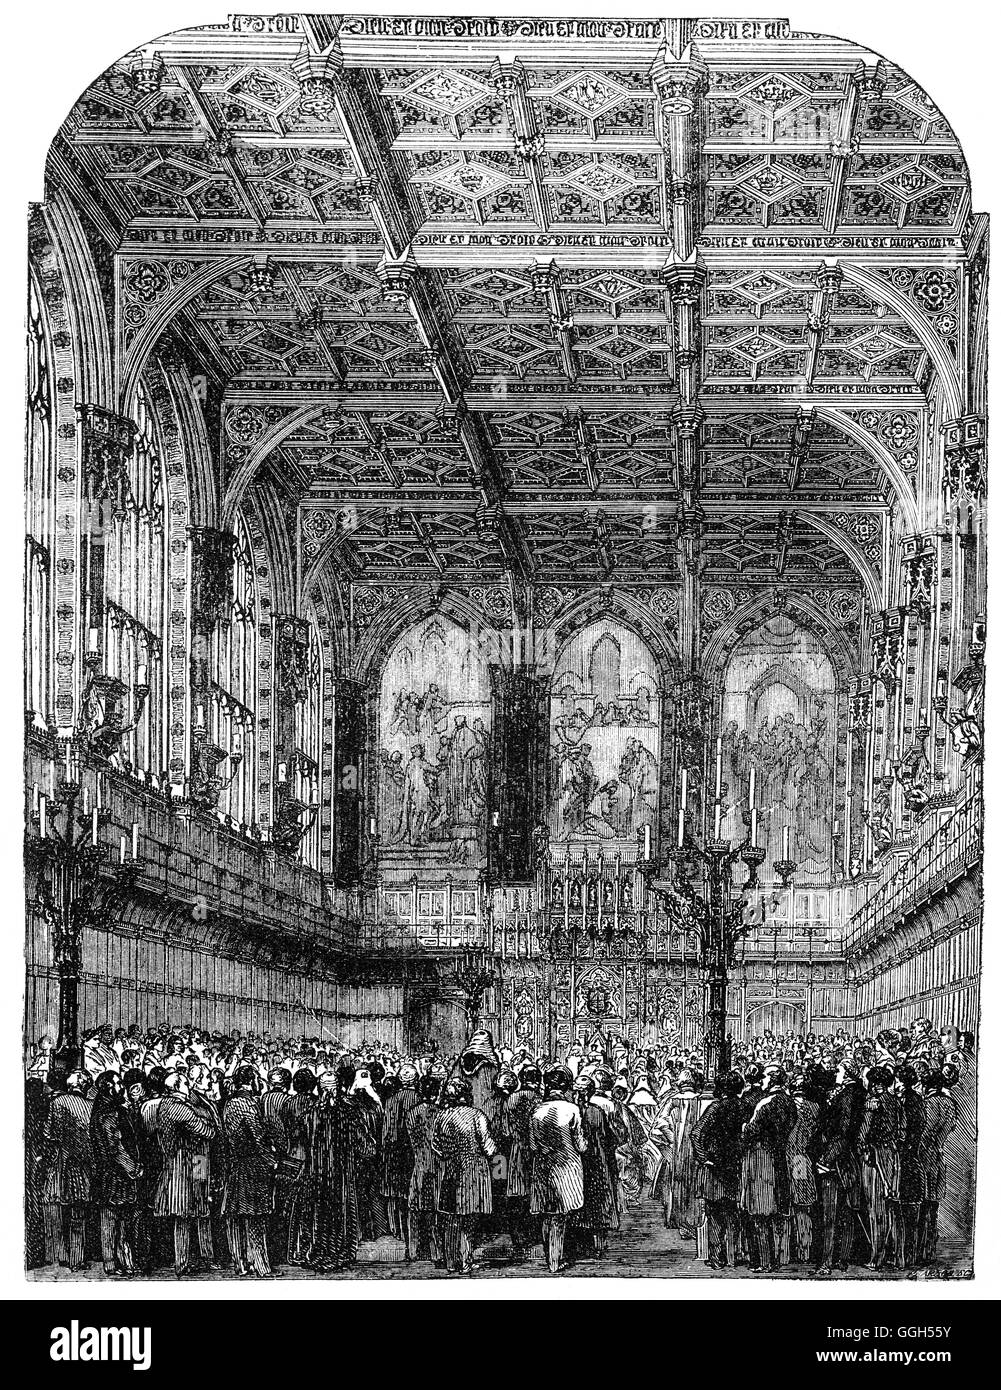 Interior of the House of Lords, built in the perpendicular Gothic style, was designed by architect Sir Charles Barry. The construction of the new palace began in 1840 after the Houses of Parliament were destroyed by fire in 1834. Stock Photo